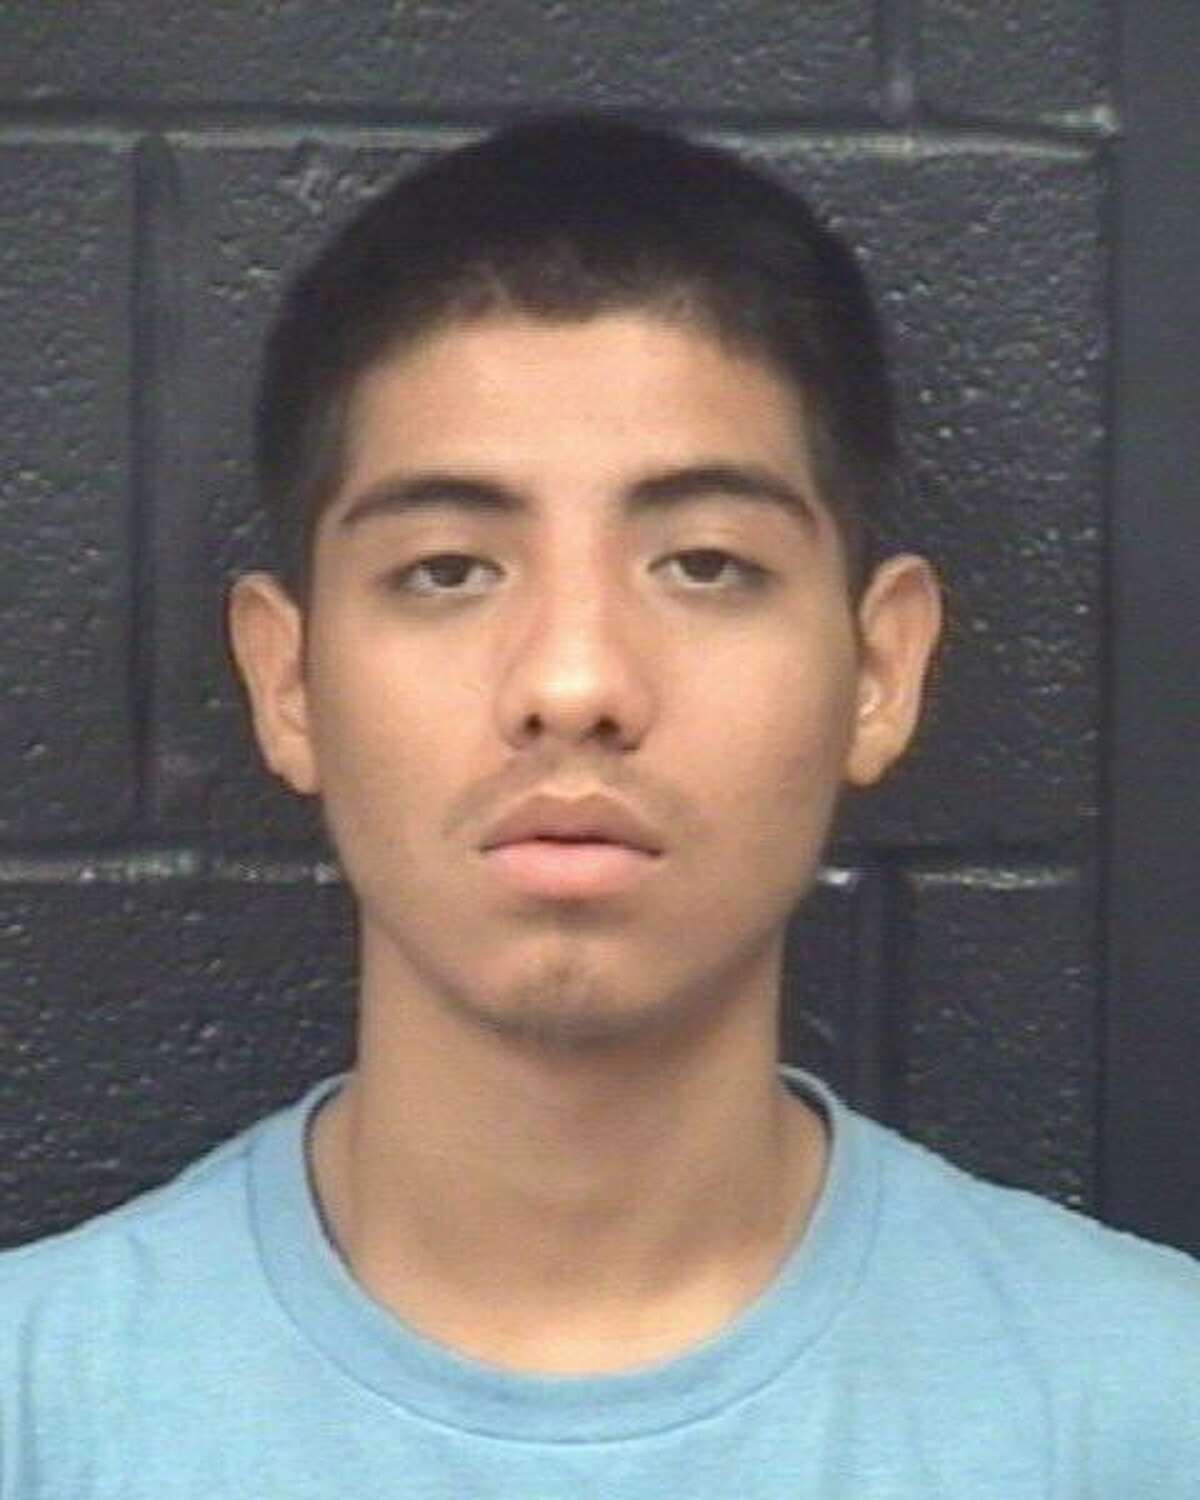 Ivan Martinez, 18, was charged with robbery and aggravated robbery.